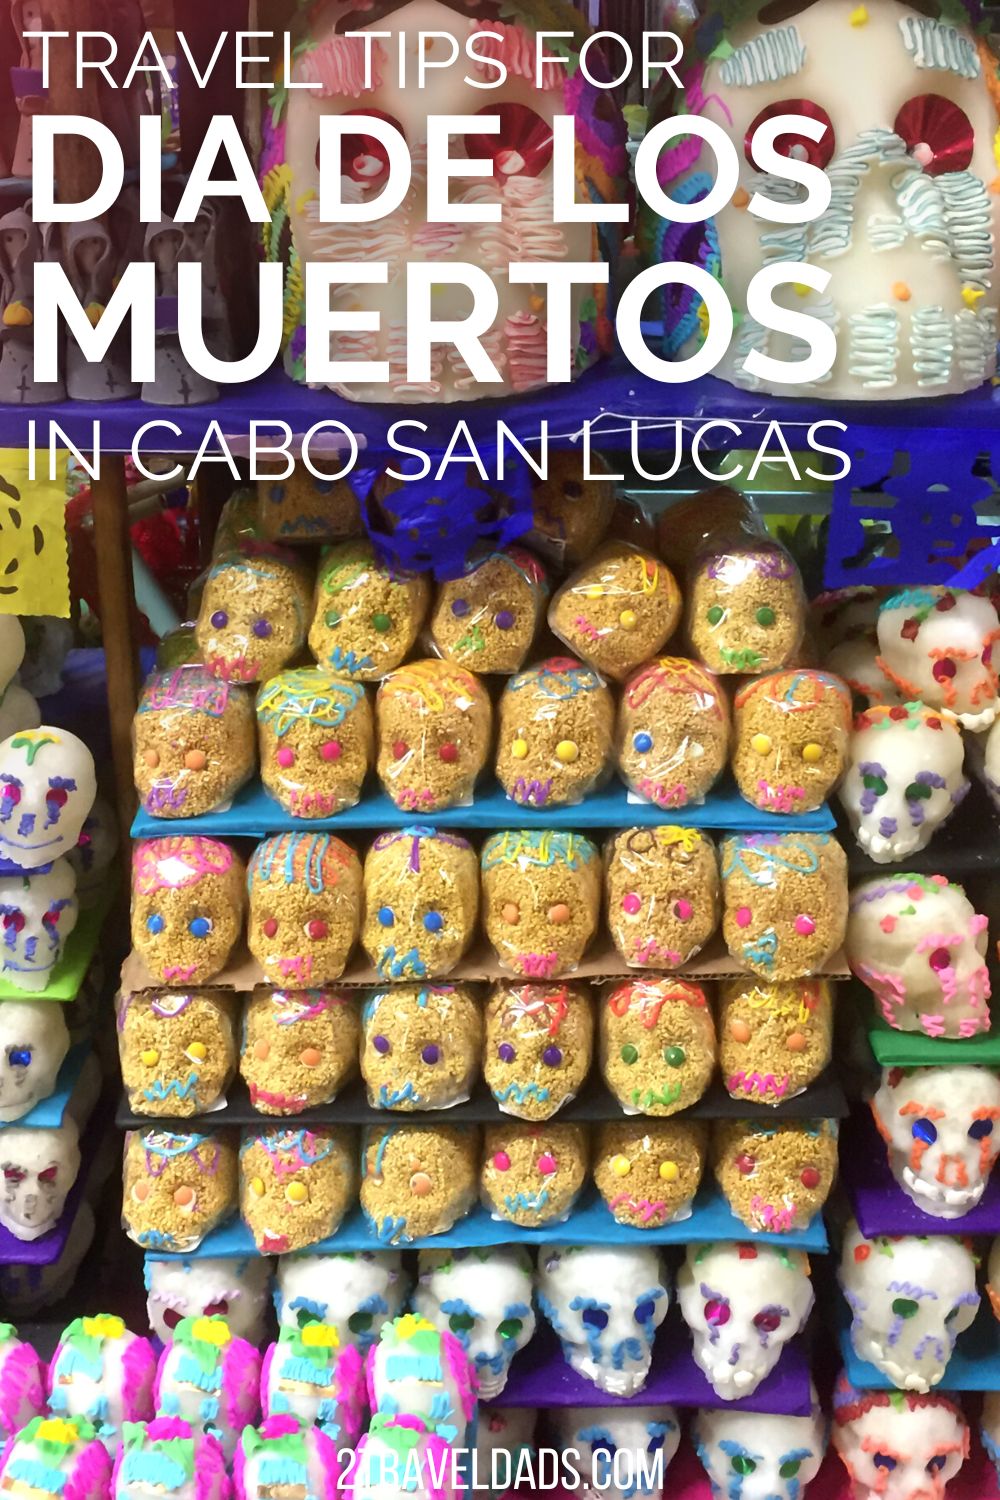 Halloween and Dia de los Muertos in Cabo San Lucas is a fun experience. From amazing food to a unique take on trick or treating, Halloween time in Cabo is a different sort of Mexican vacation.